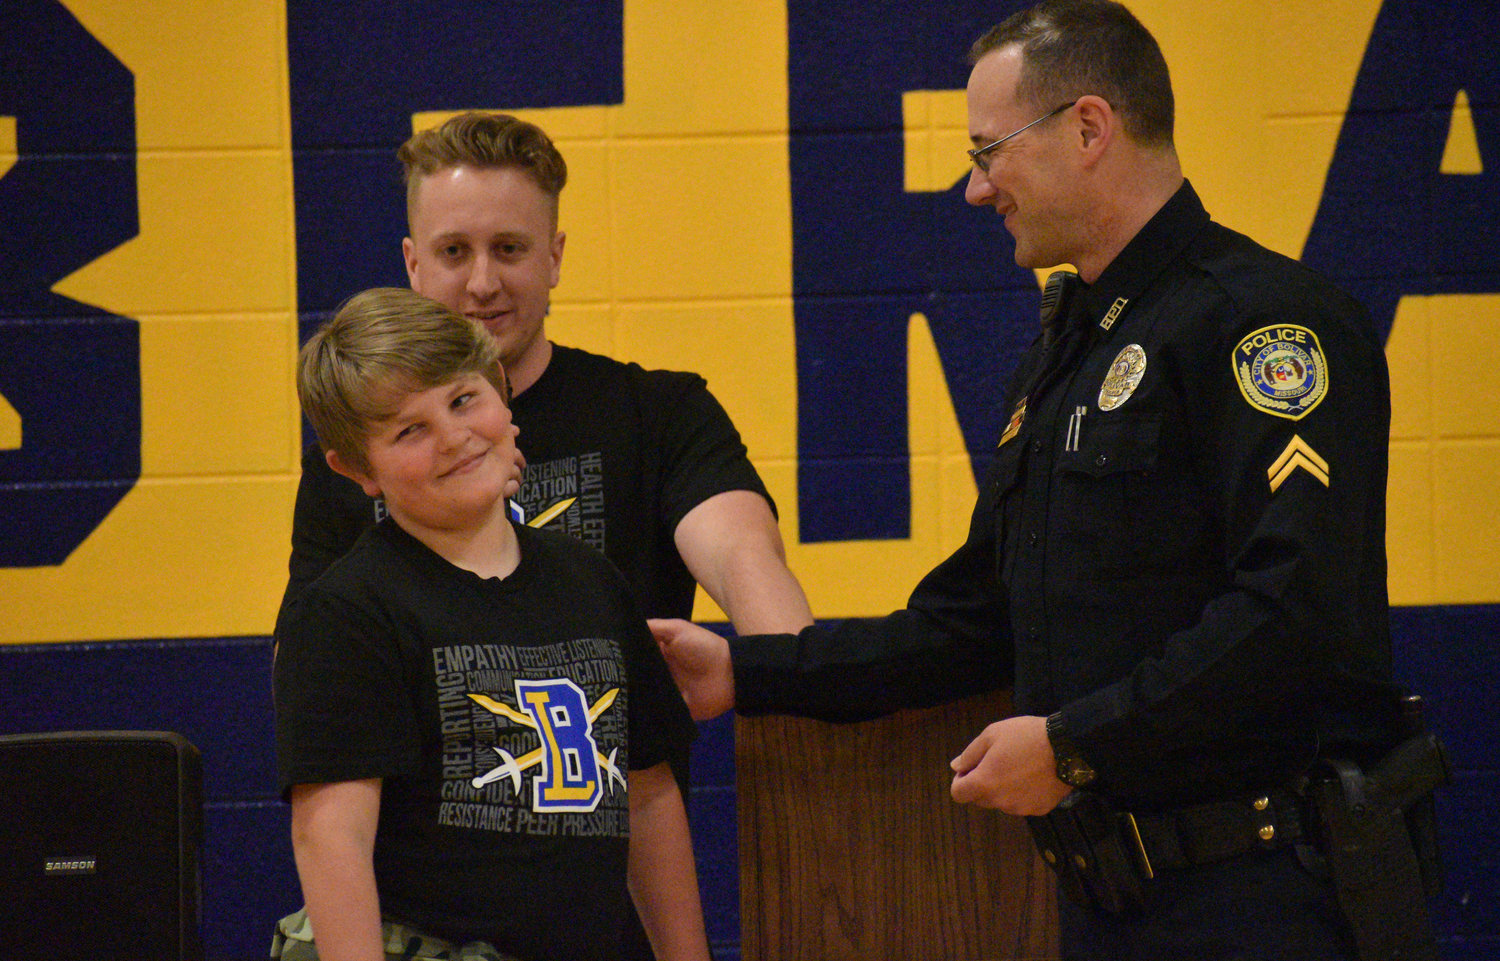 Fifth-grade teacher Jacob Allee and Cpl. Scott Hendrickson look on as D.A.R.E. graduate Jeffrey Stormant flashes a smile at his friends.